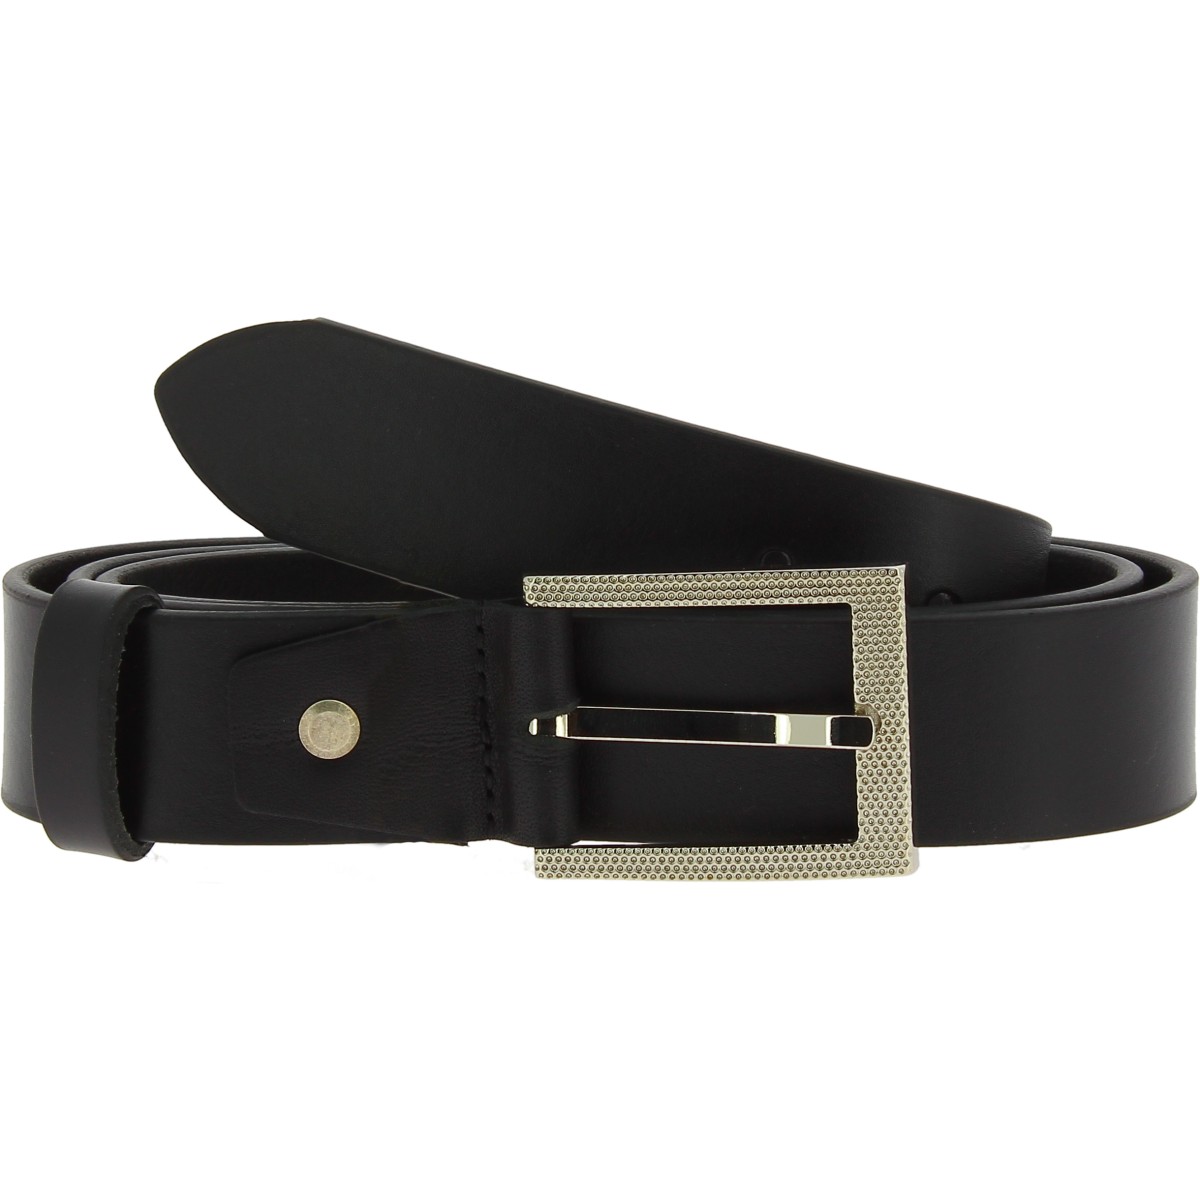 Genuine black leather belt with classic rectangular metal buckle | The ...